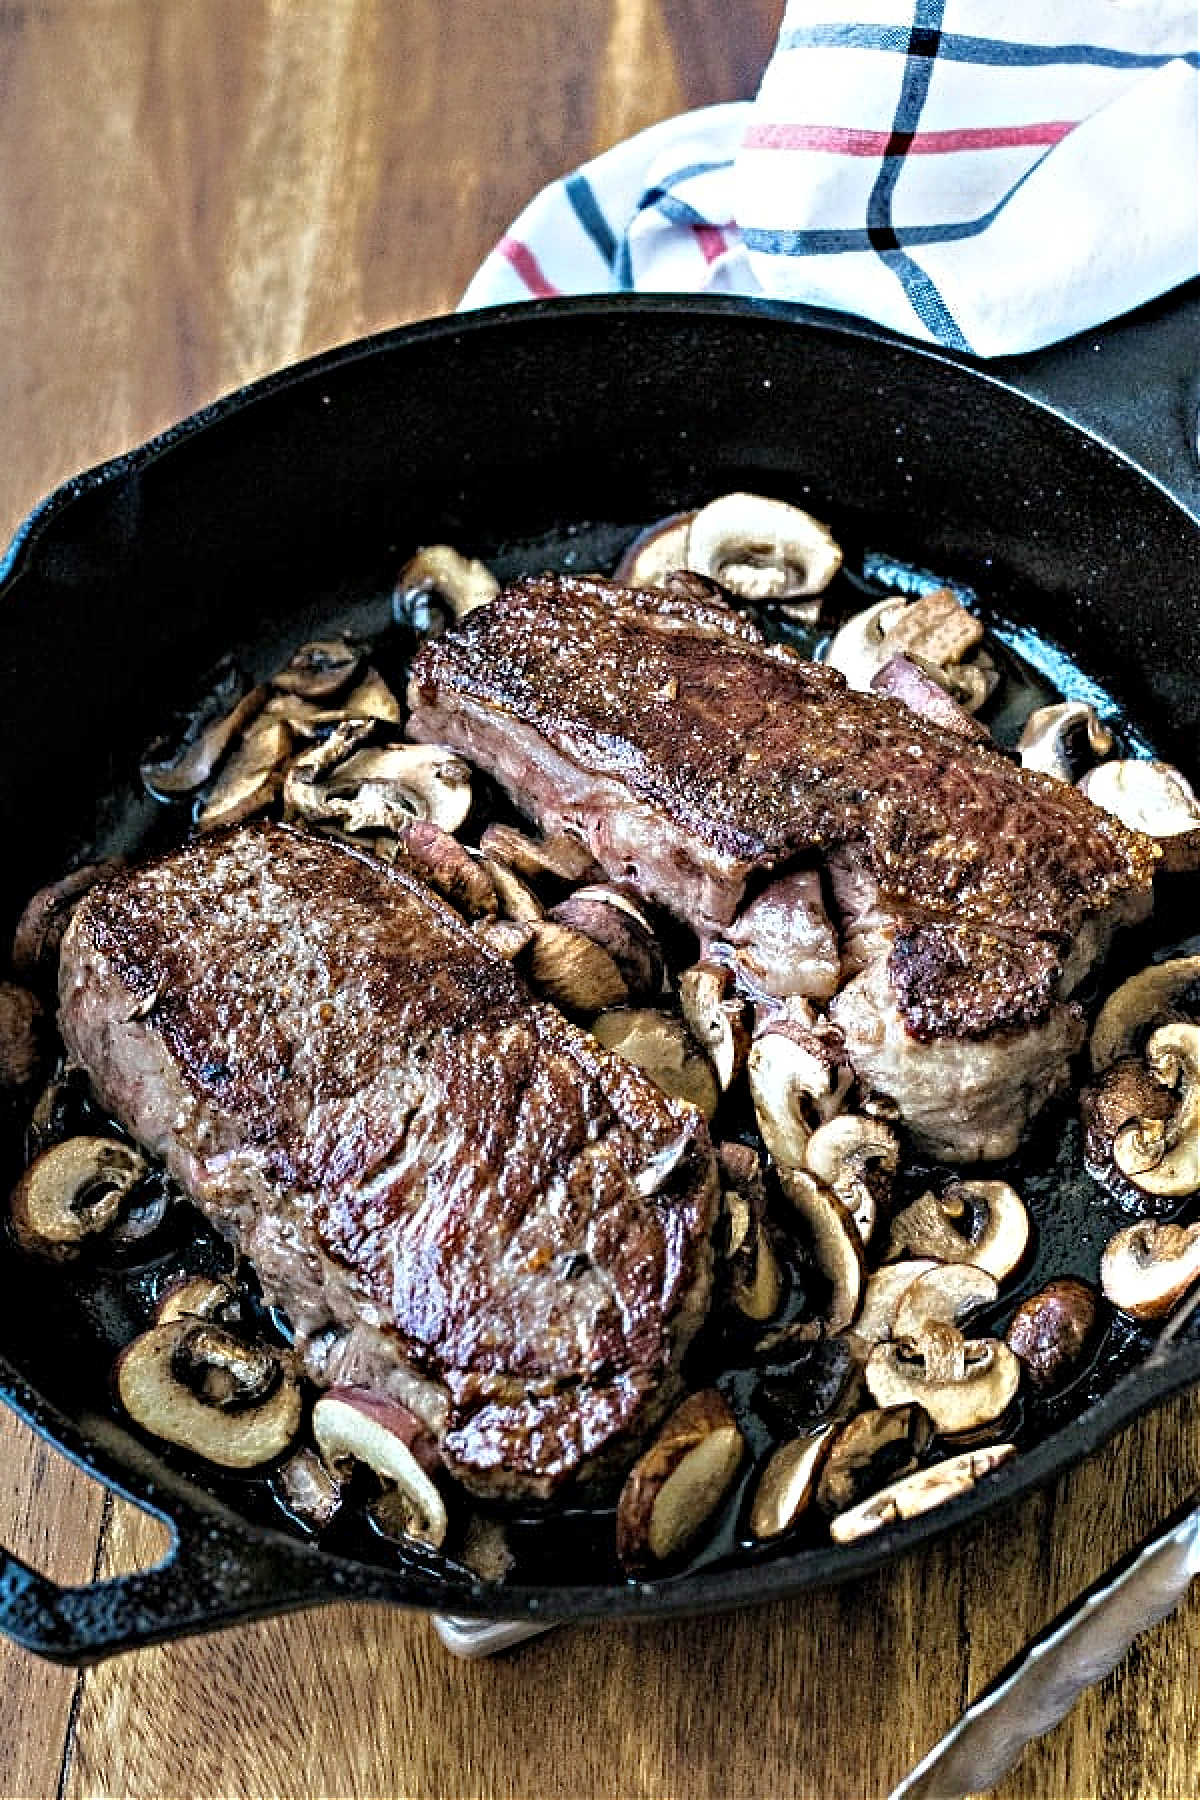 two new york strip steaks in a cast iron skillet on a wooden table.